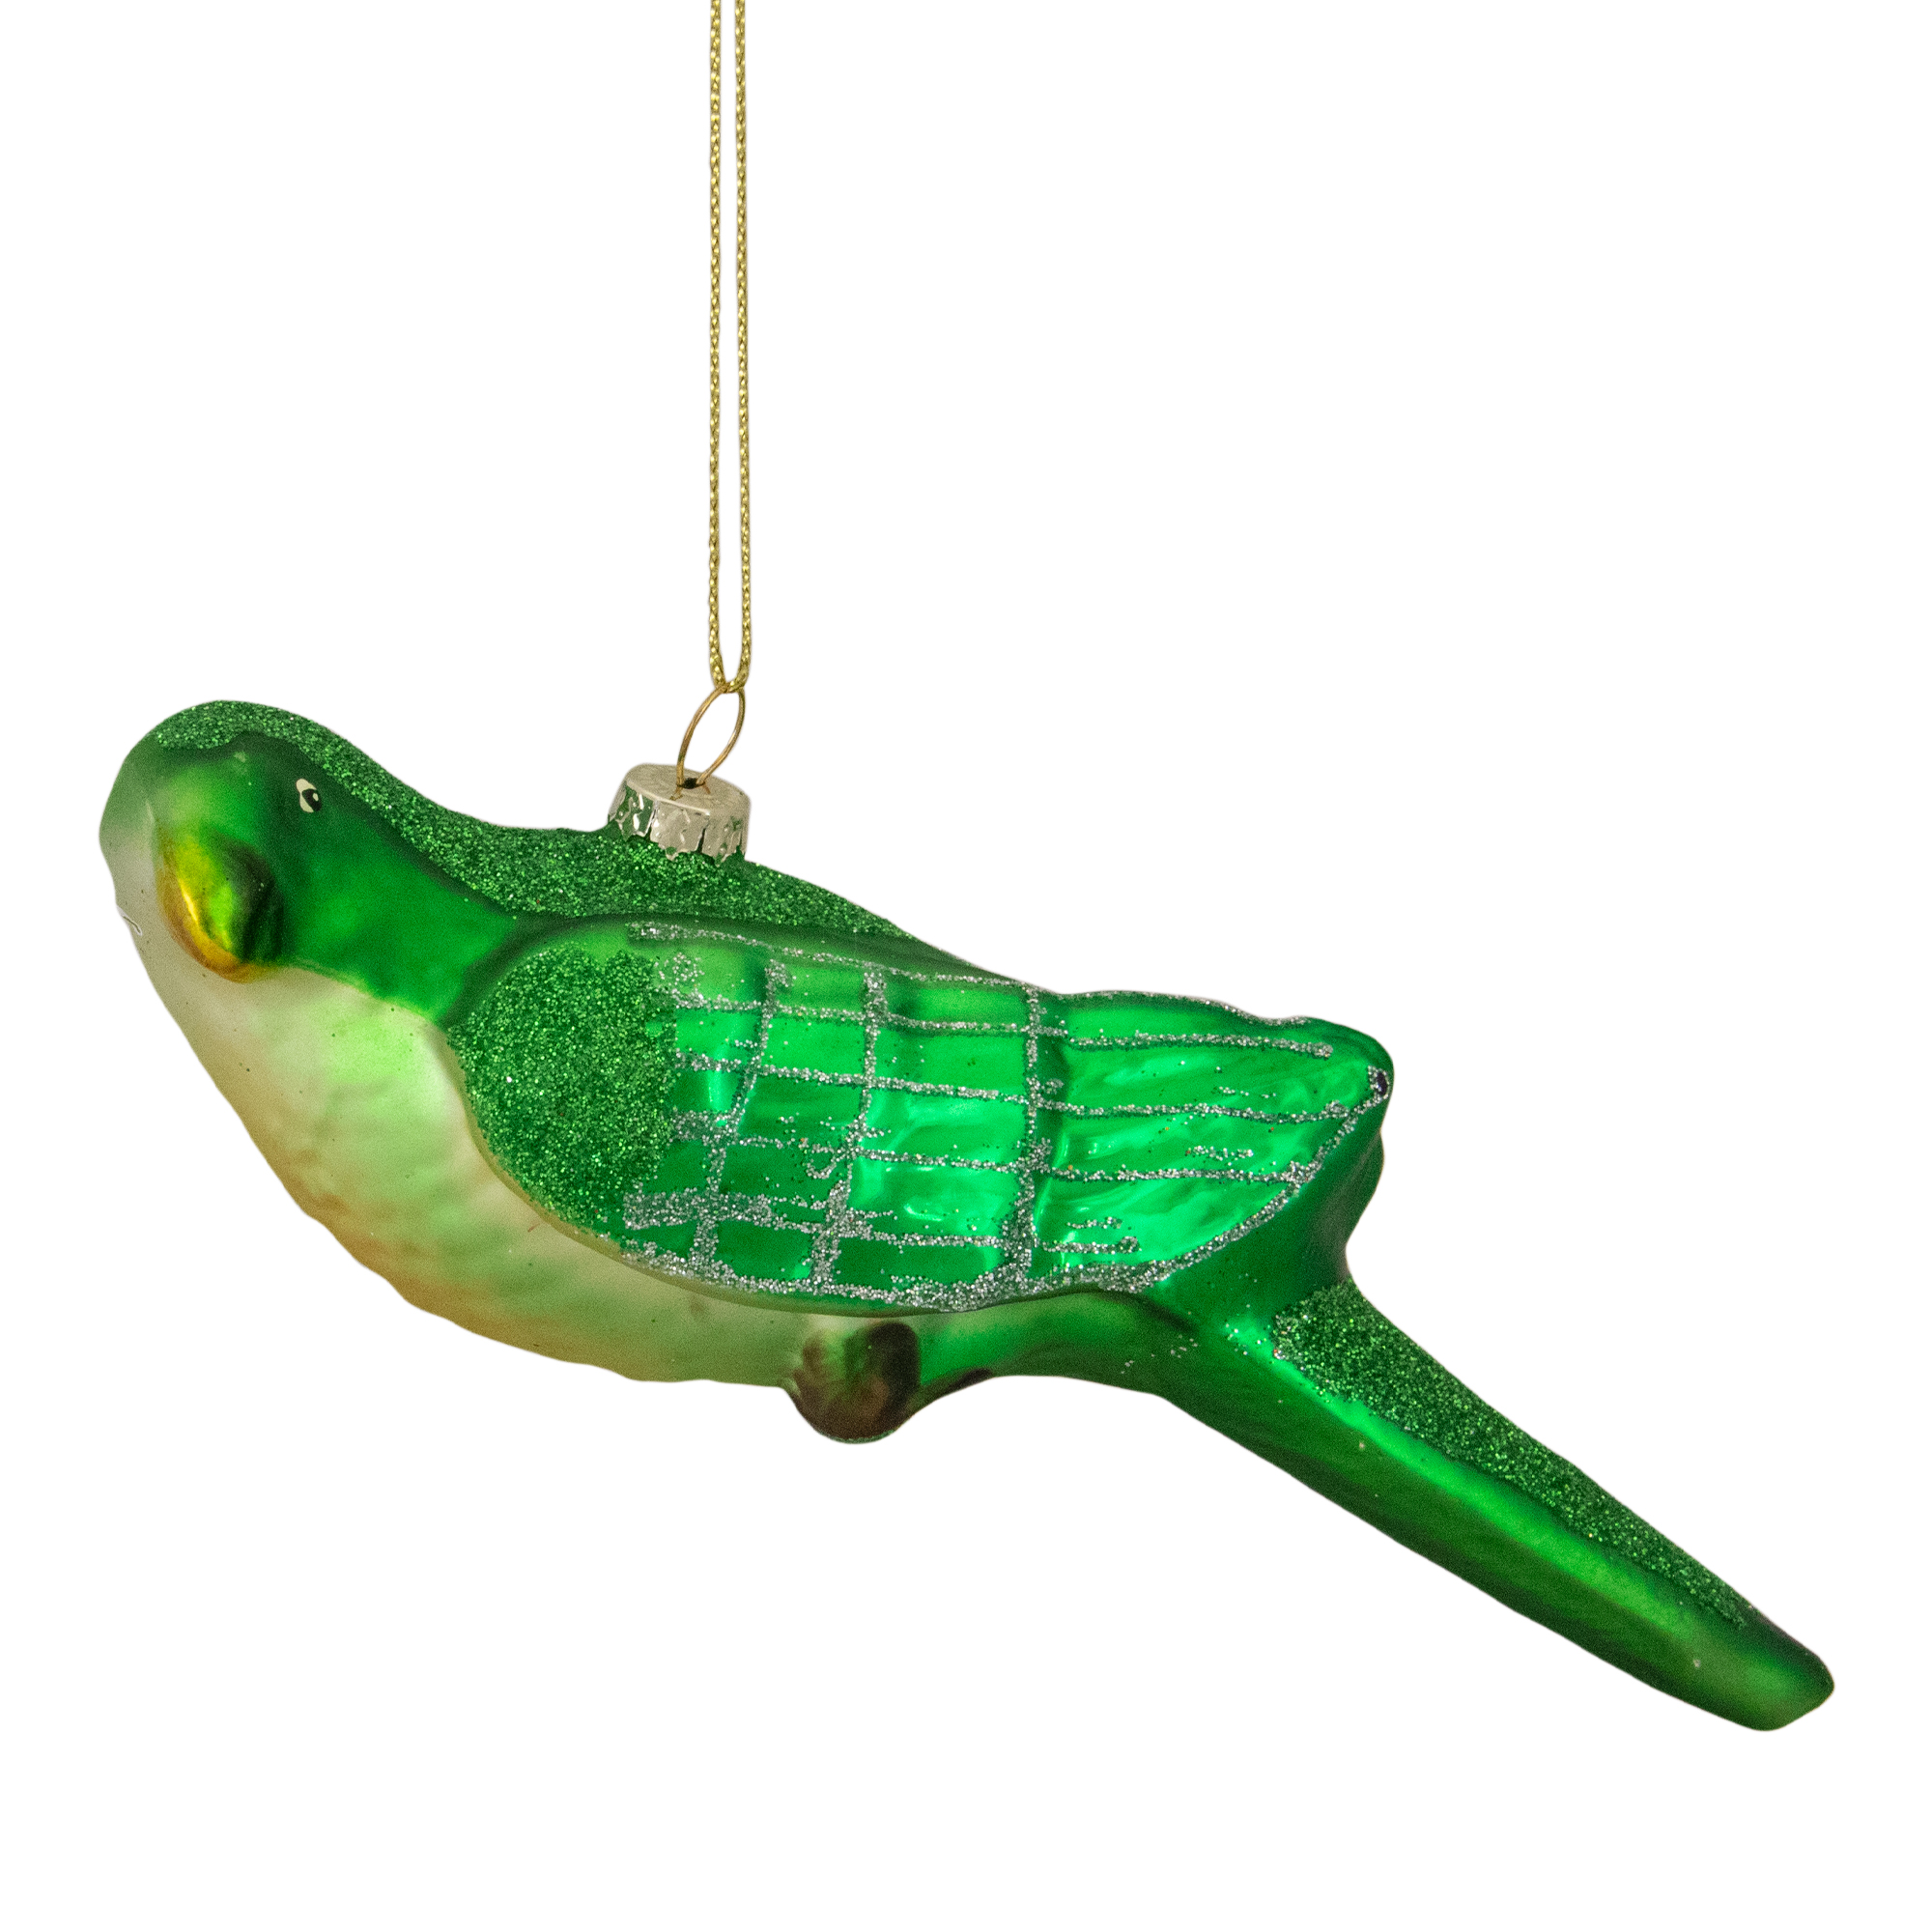 6.5" Green and Yellow Parrot Glass Christmas Ornament